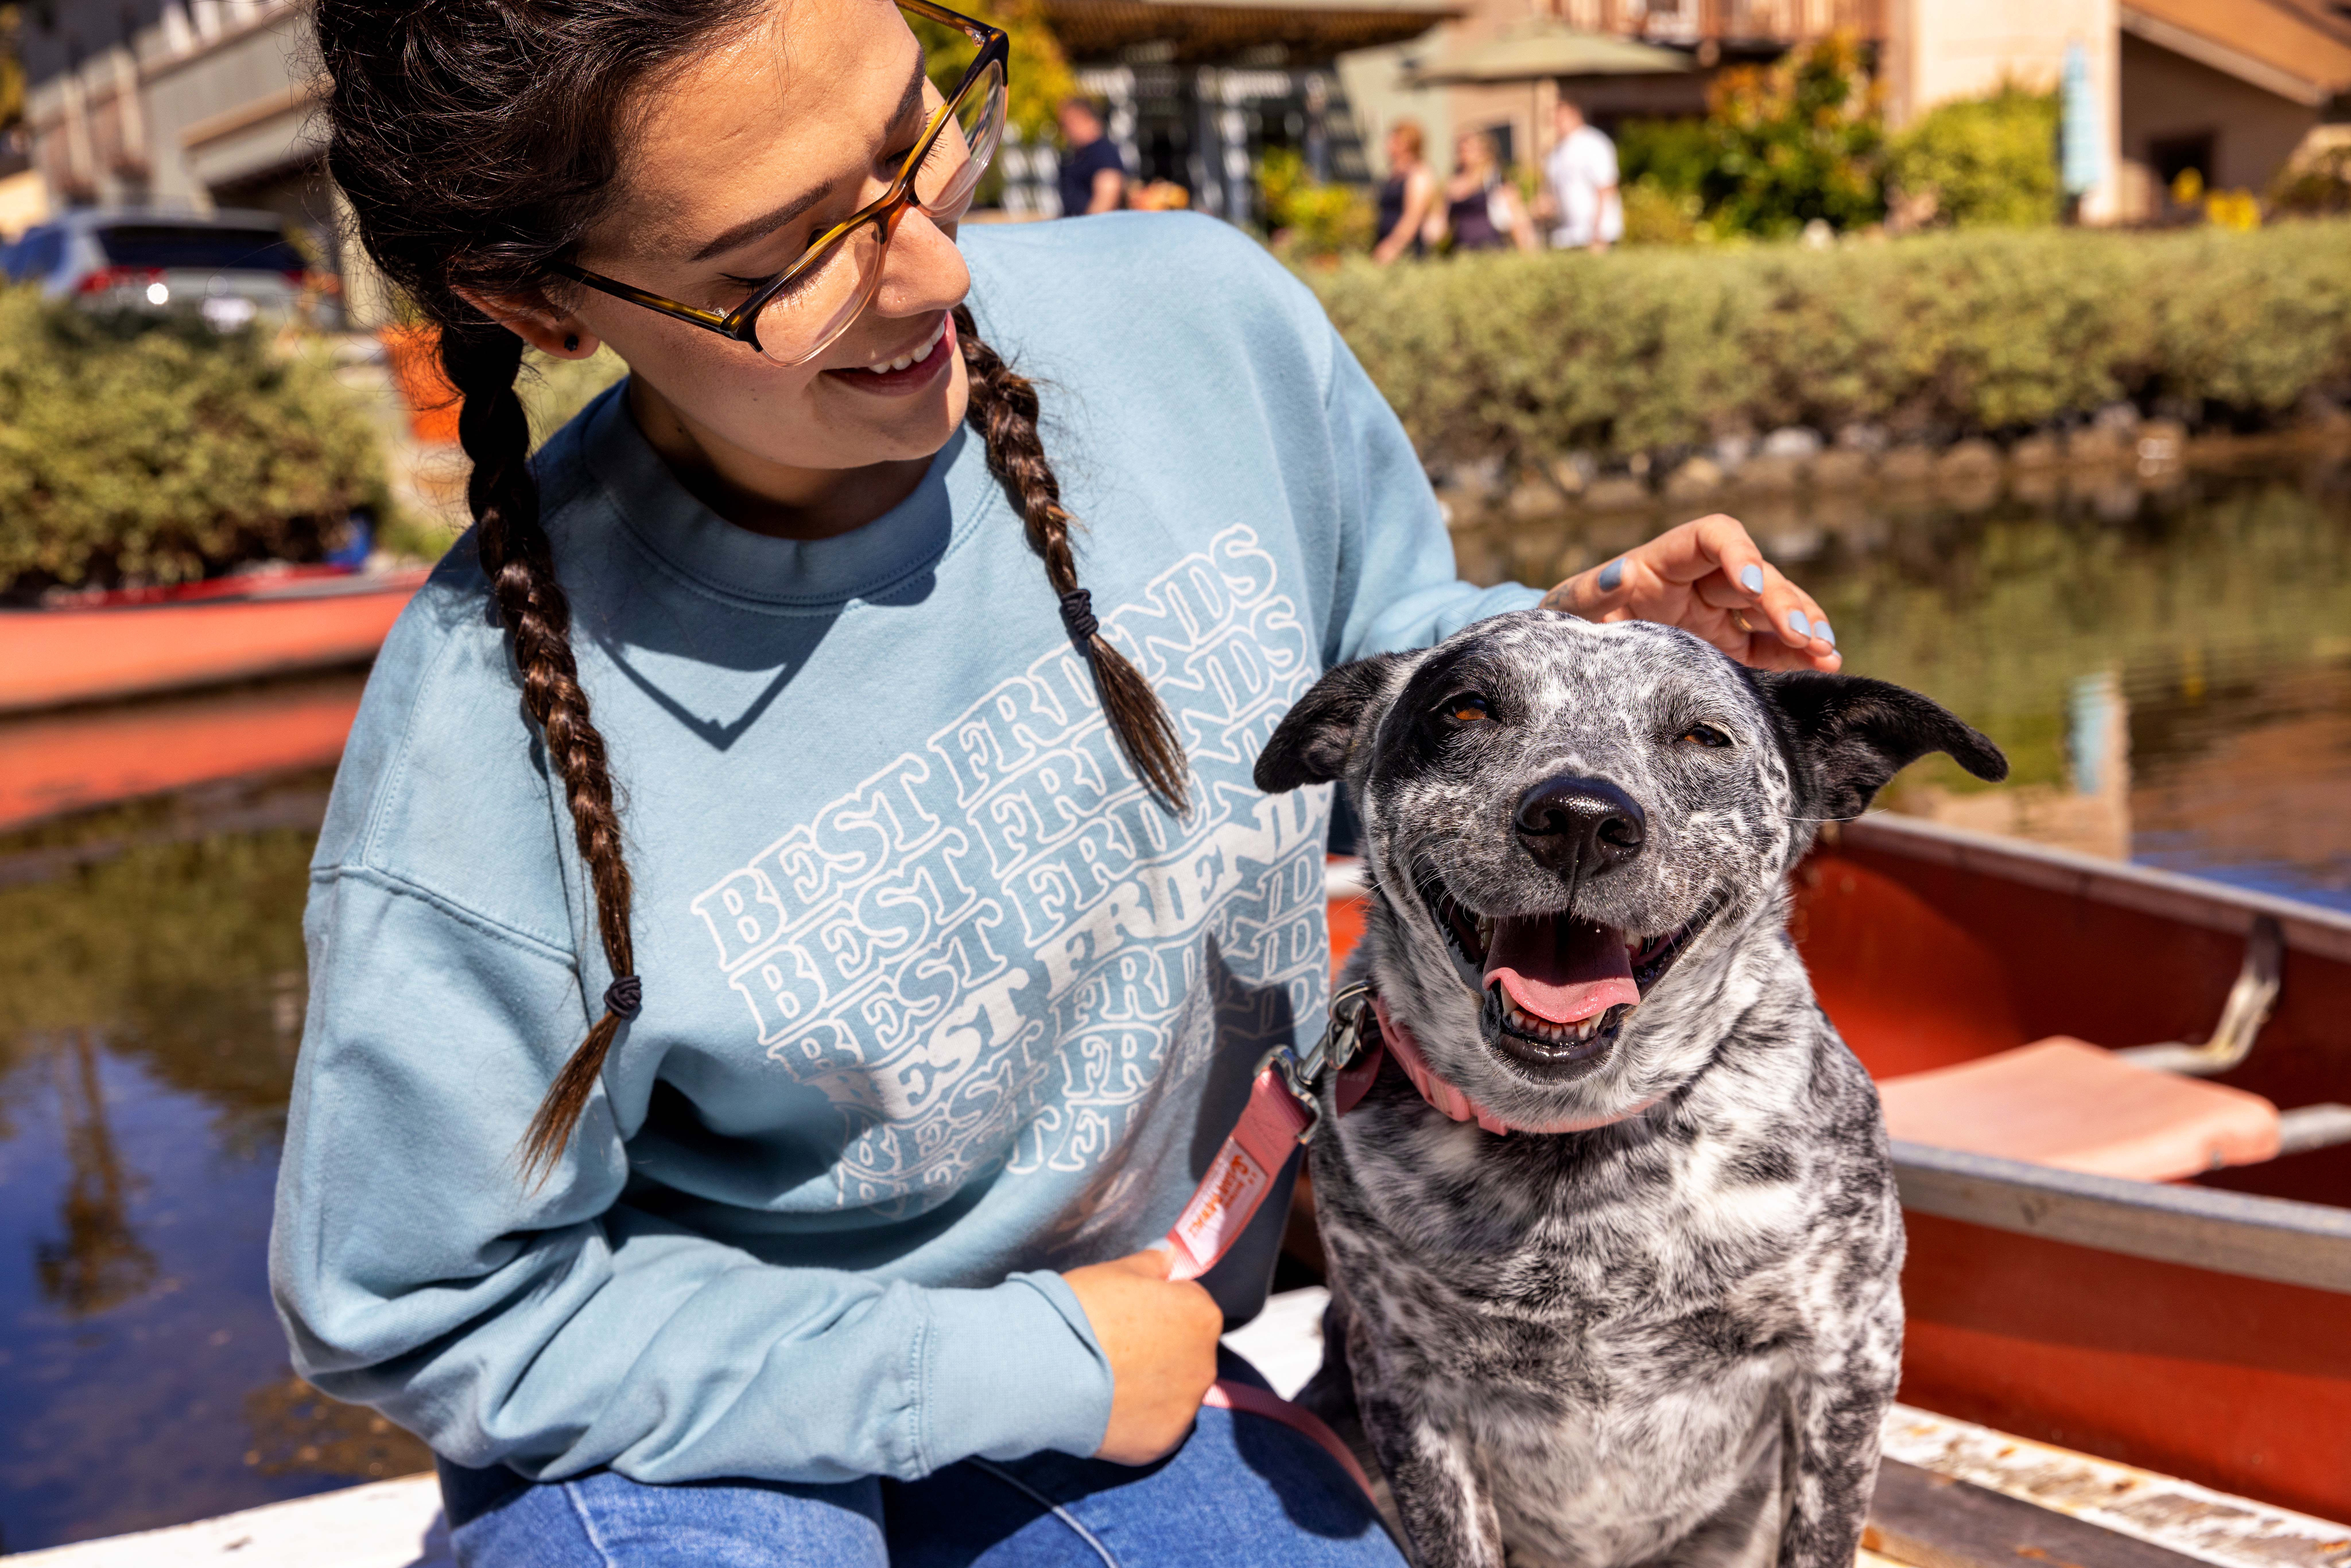 Smiling person wearing braids and a Best Friends sweatshirt petting a happy dog